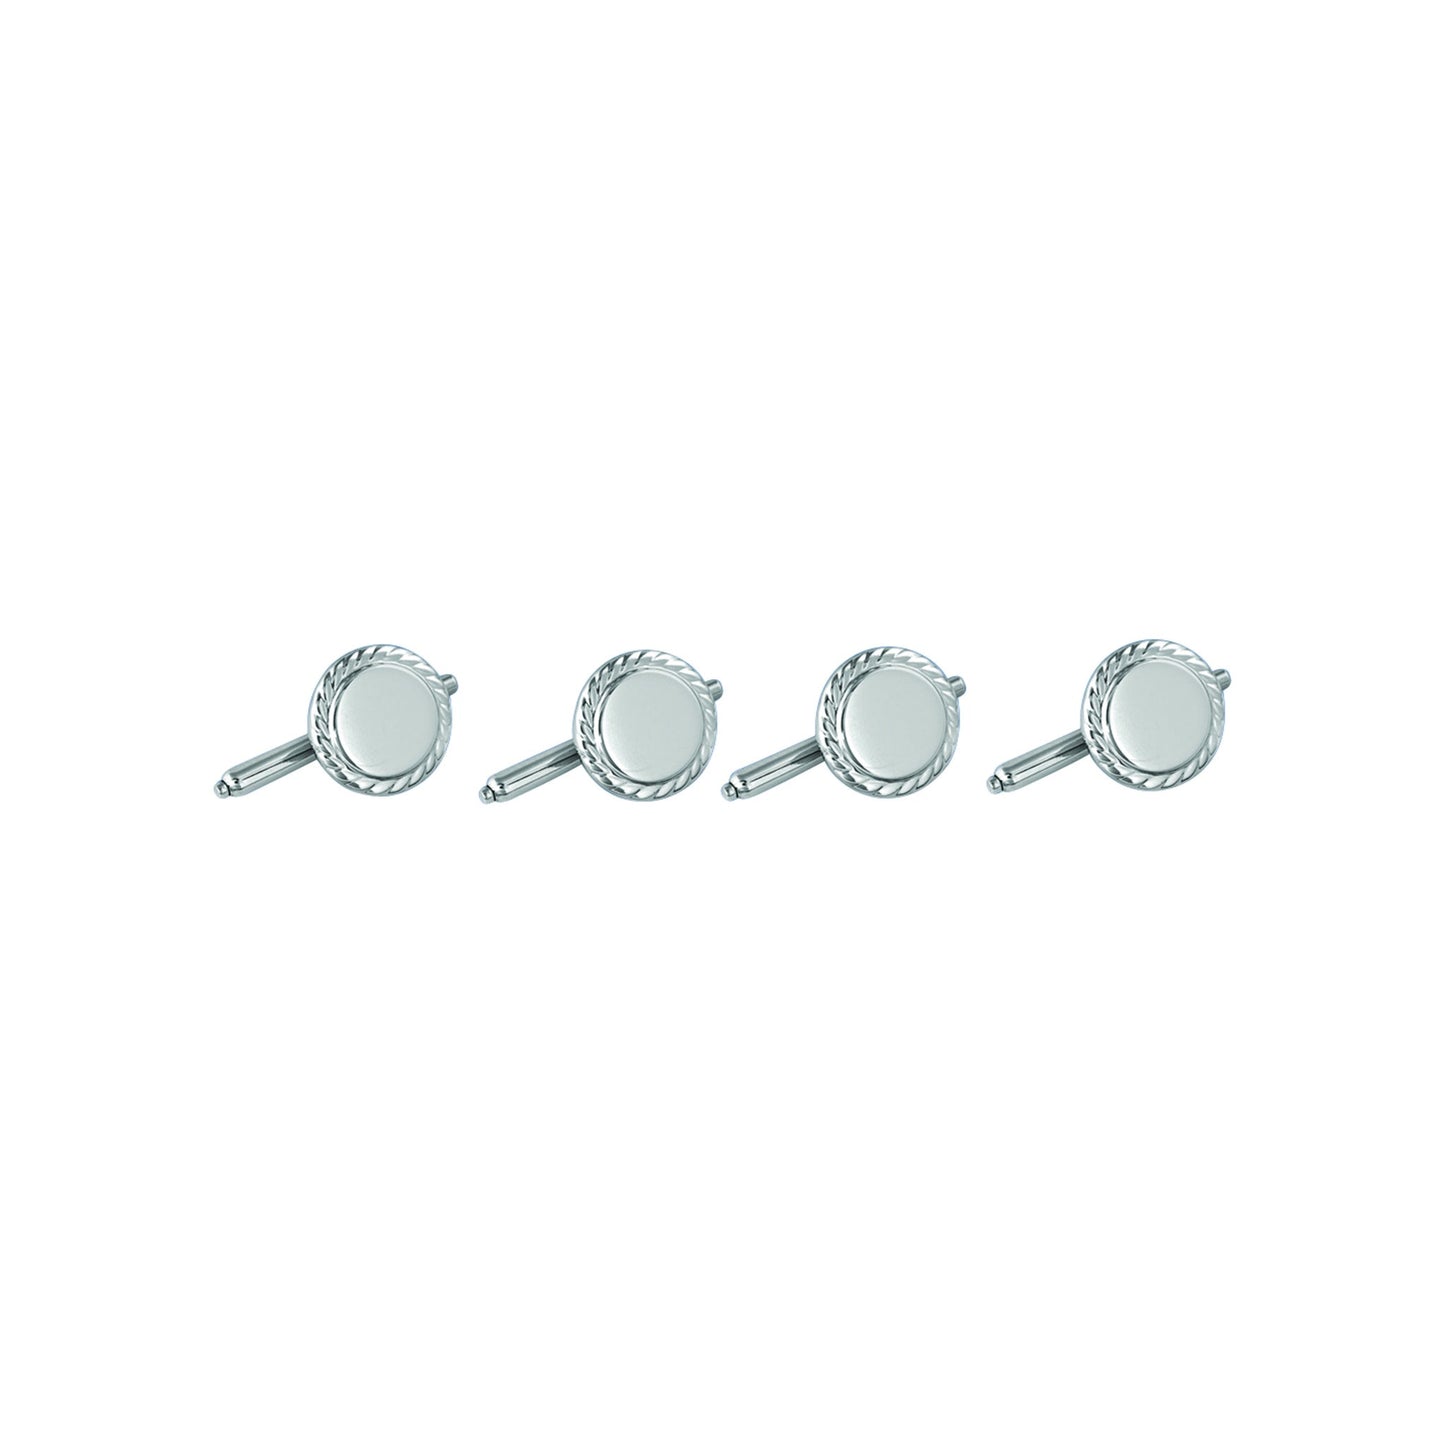 A four piece sterling silver rope edge polished stud set displayed on a neutral white background.